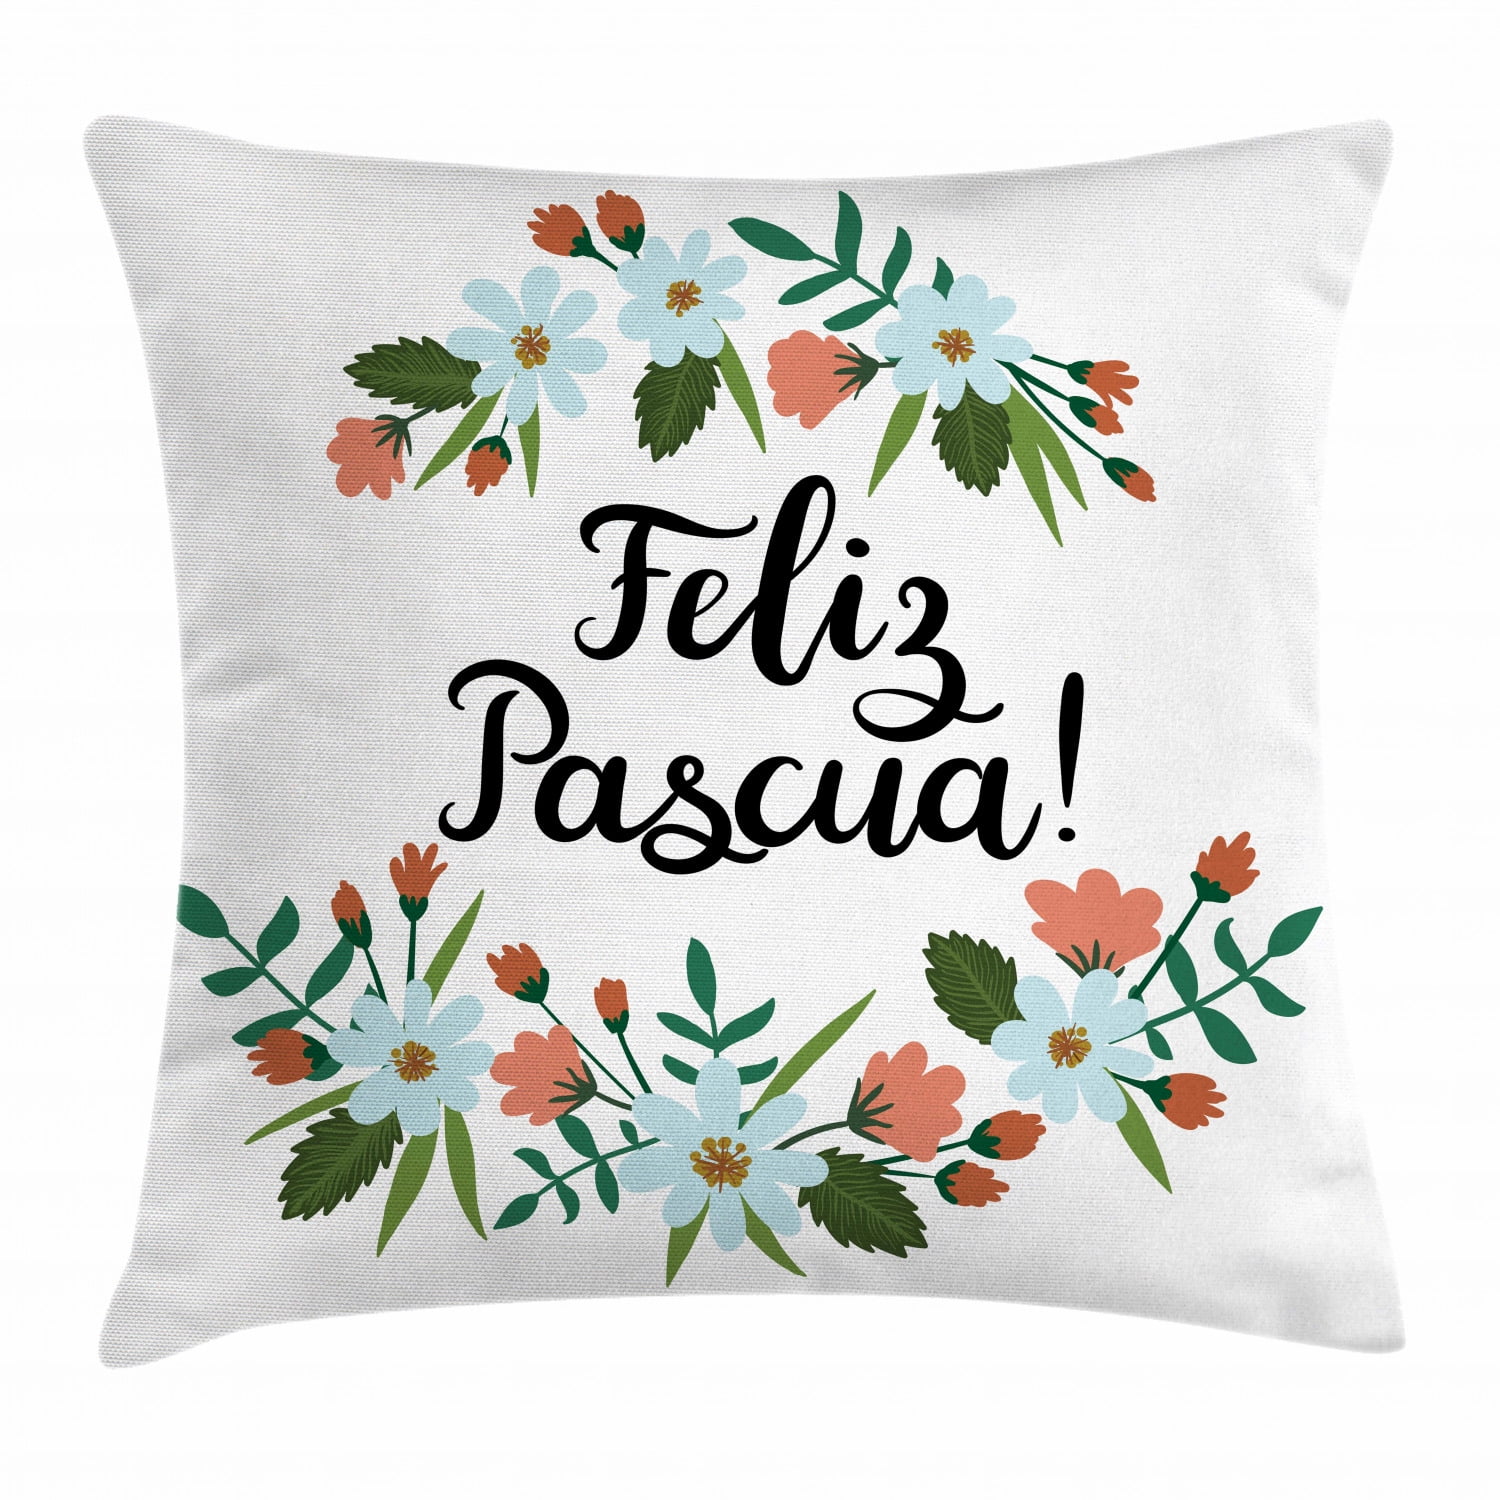 Spanish Throw Pillow Cases Cushion Covers Home Decor 8 Sizes Ambesonne 